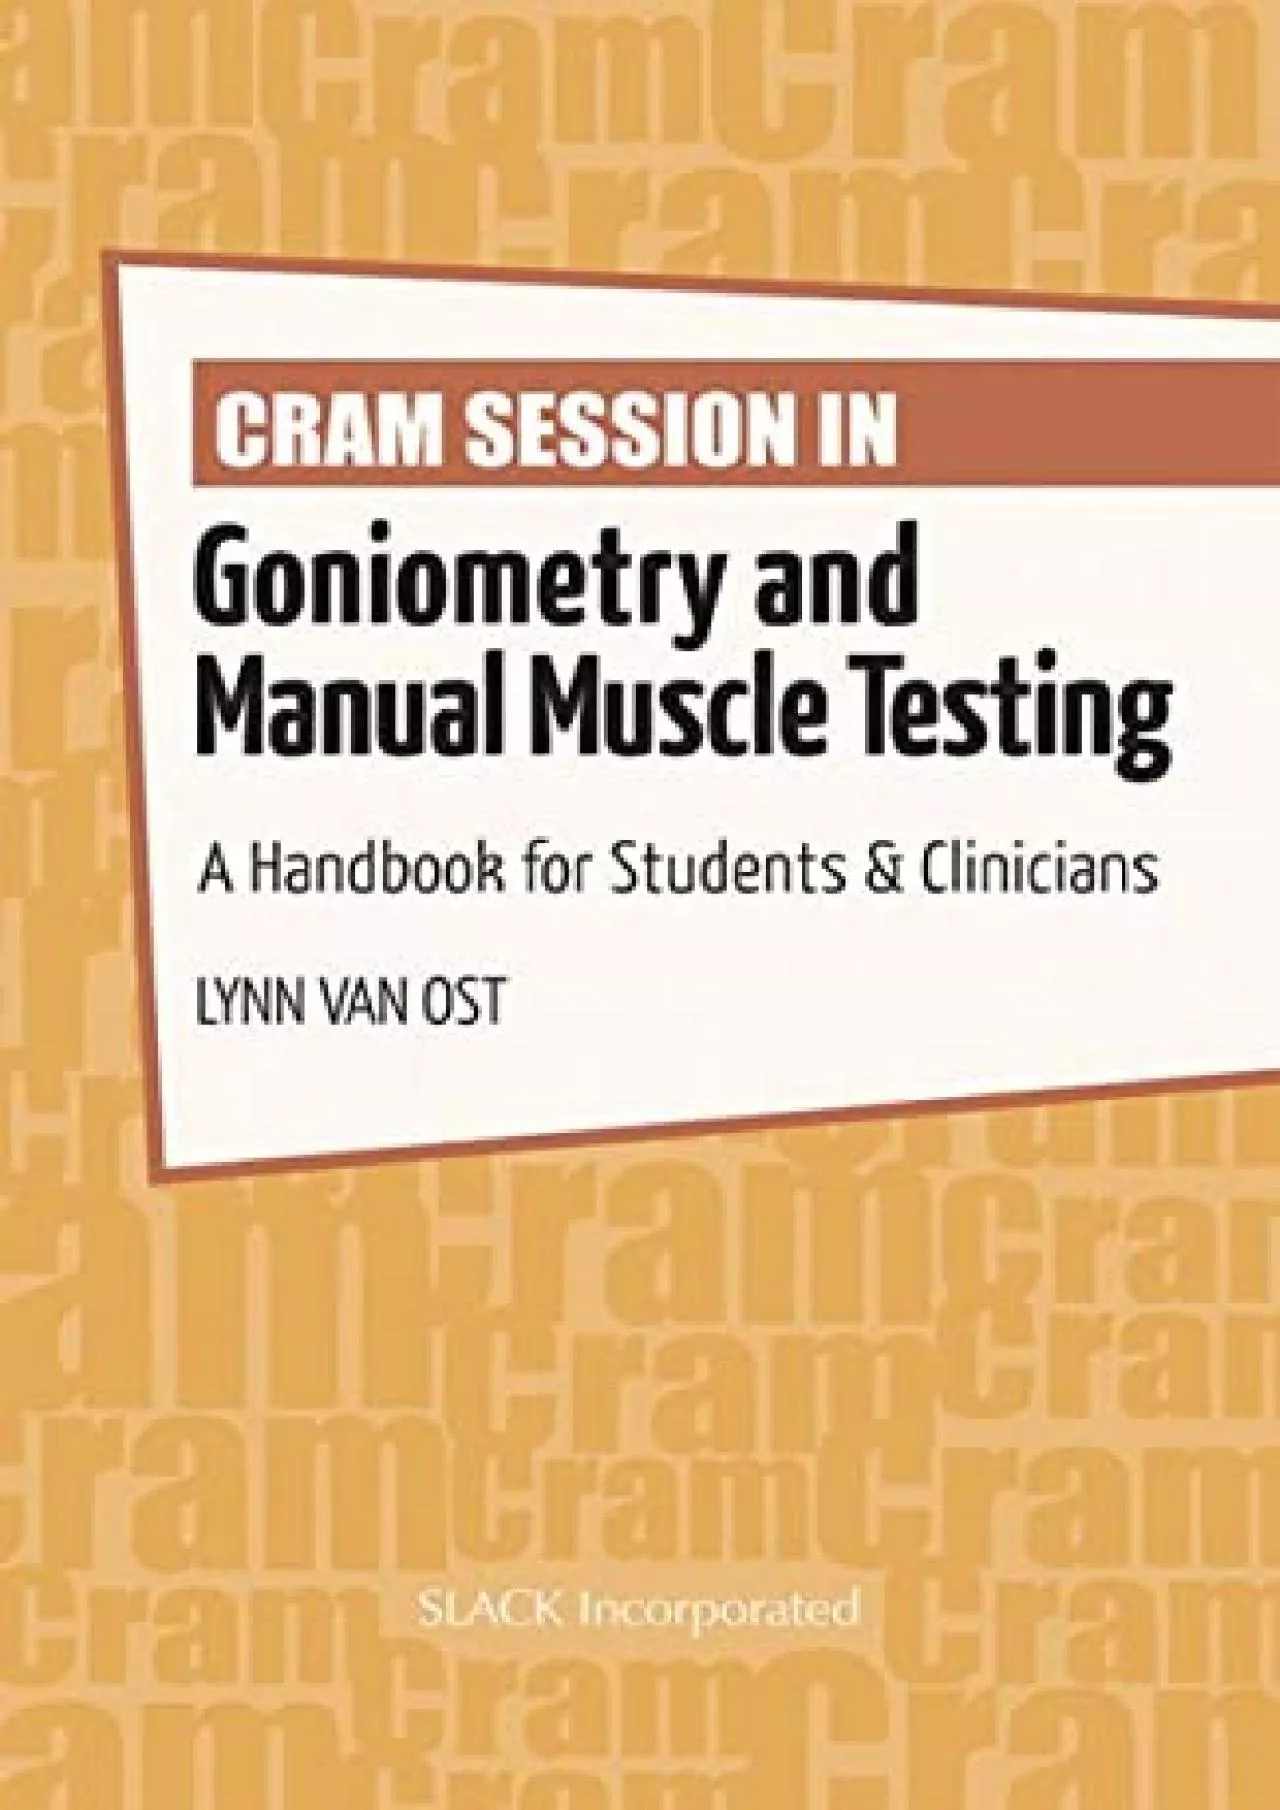 (EBOOK)-Cram Session in Goniometry and Manual Muscle Testing: A Handbook for Students